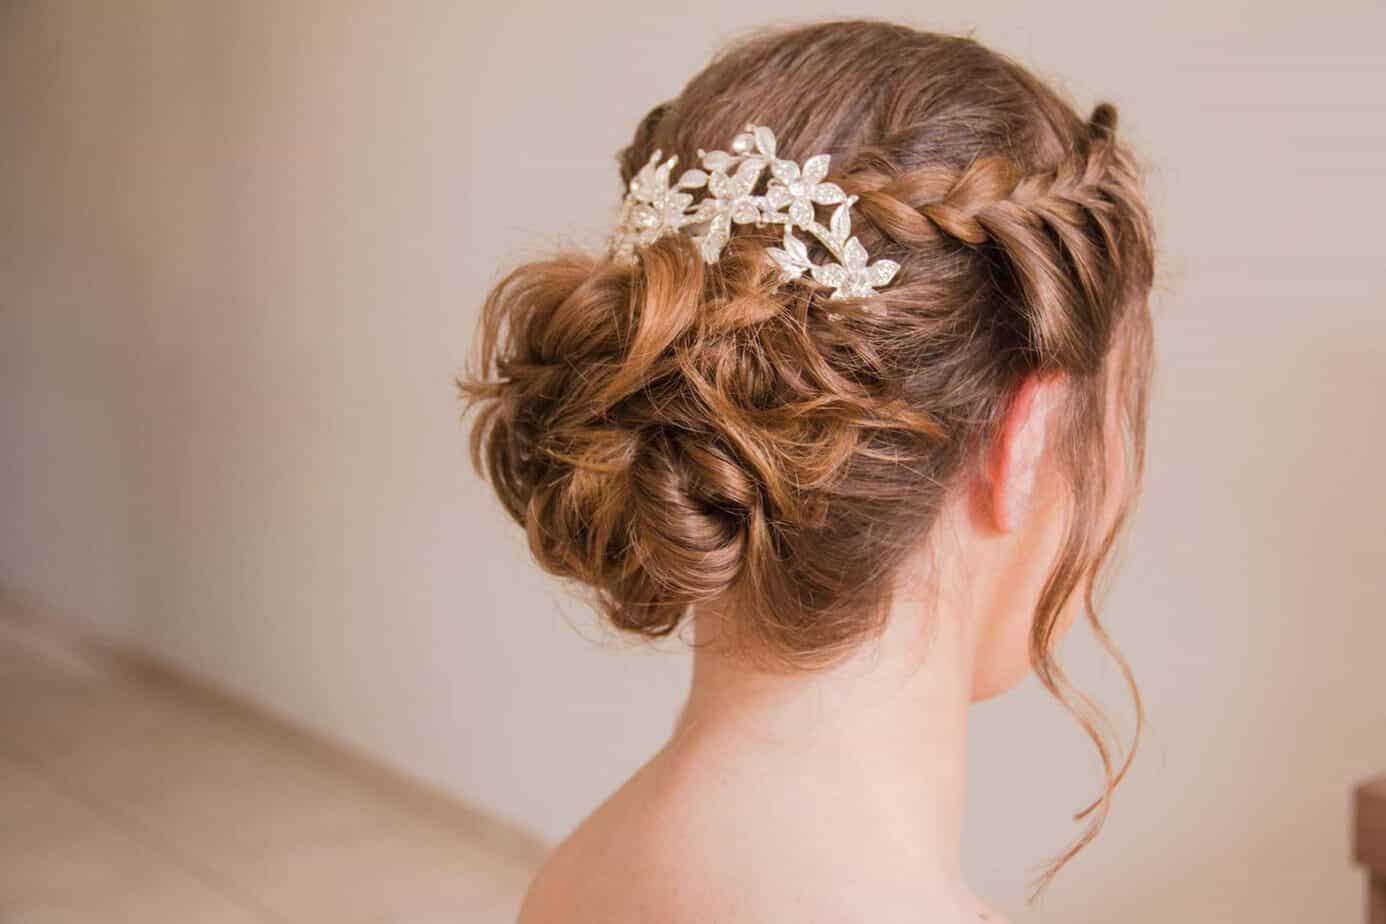 Wedding Hairstyles Will Be The Most Popular in 2020, Wedding Hairstyles, wedding hairstyles 2020